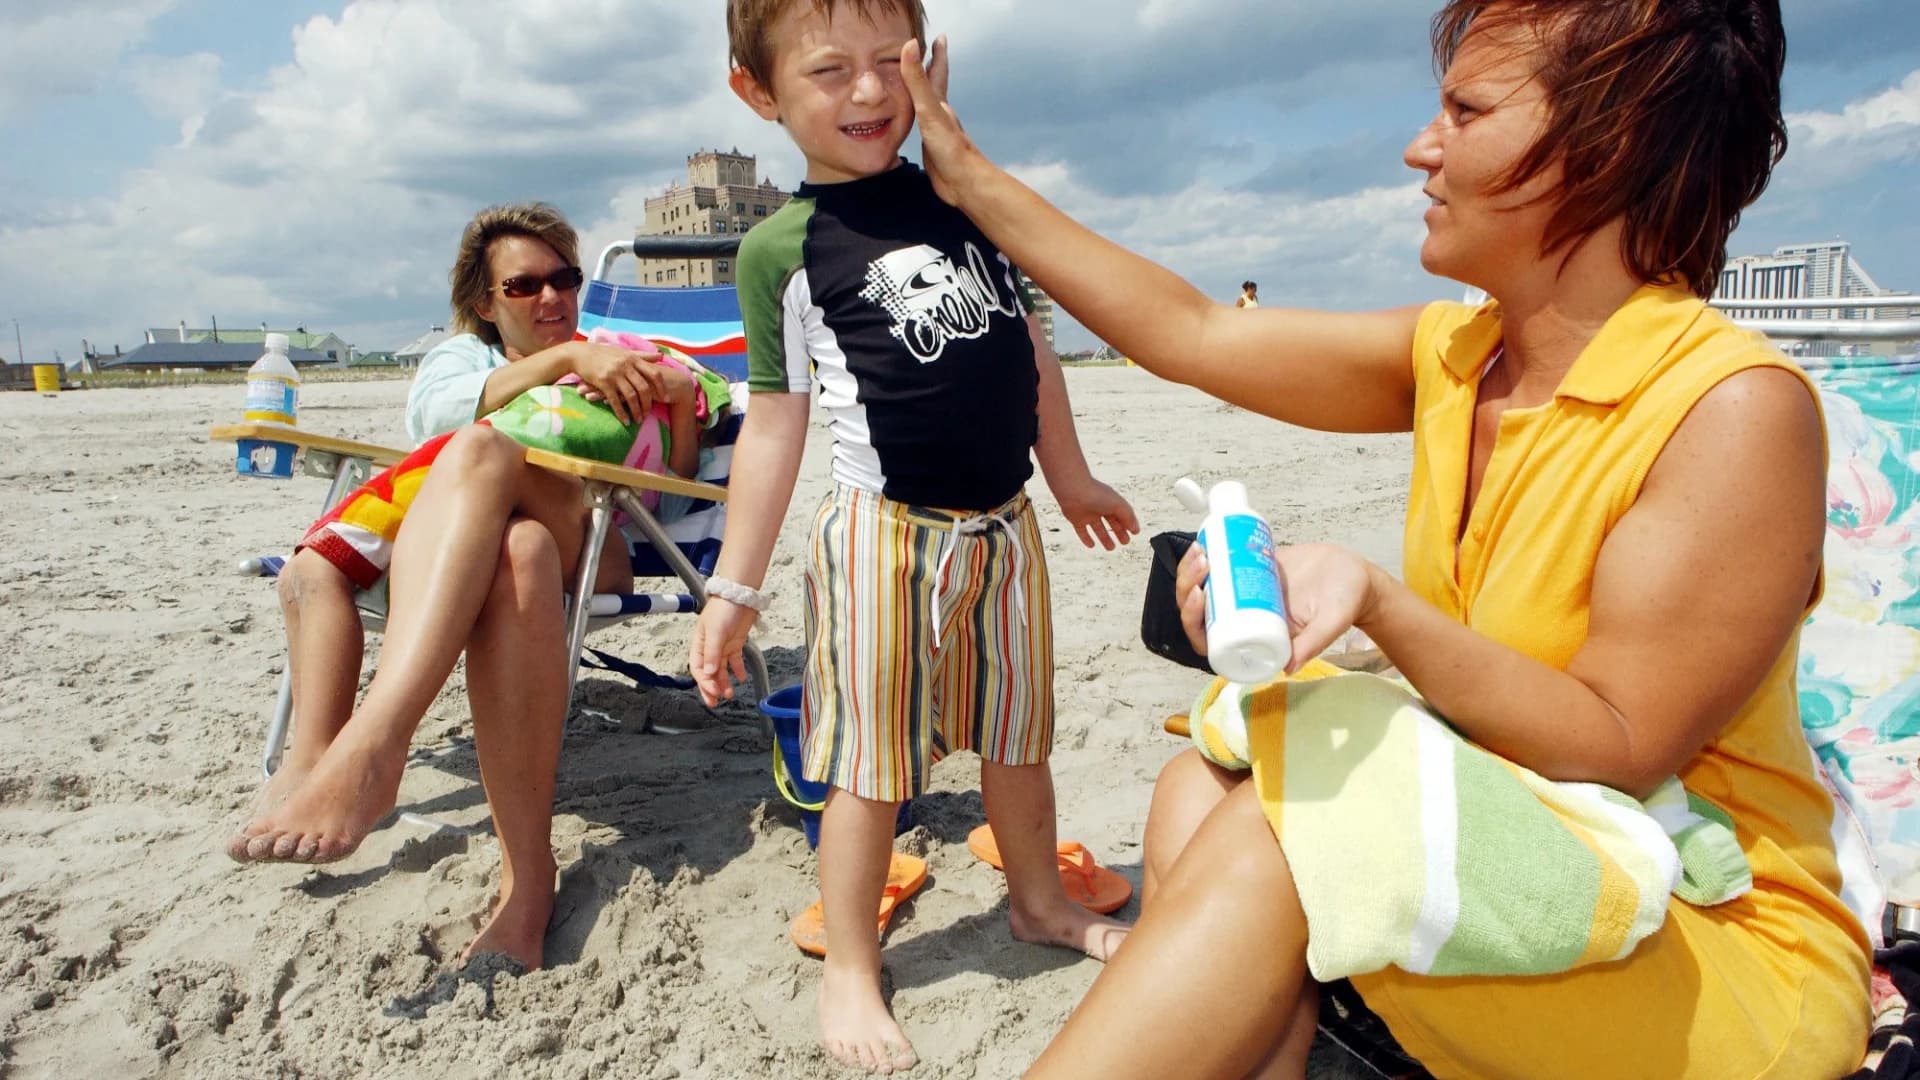 Spent some time in the sun? Here are 18 tips to treat sunburn in adults and children